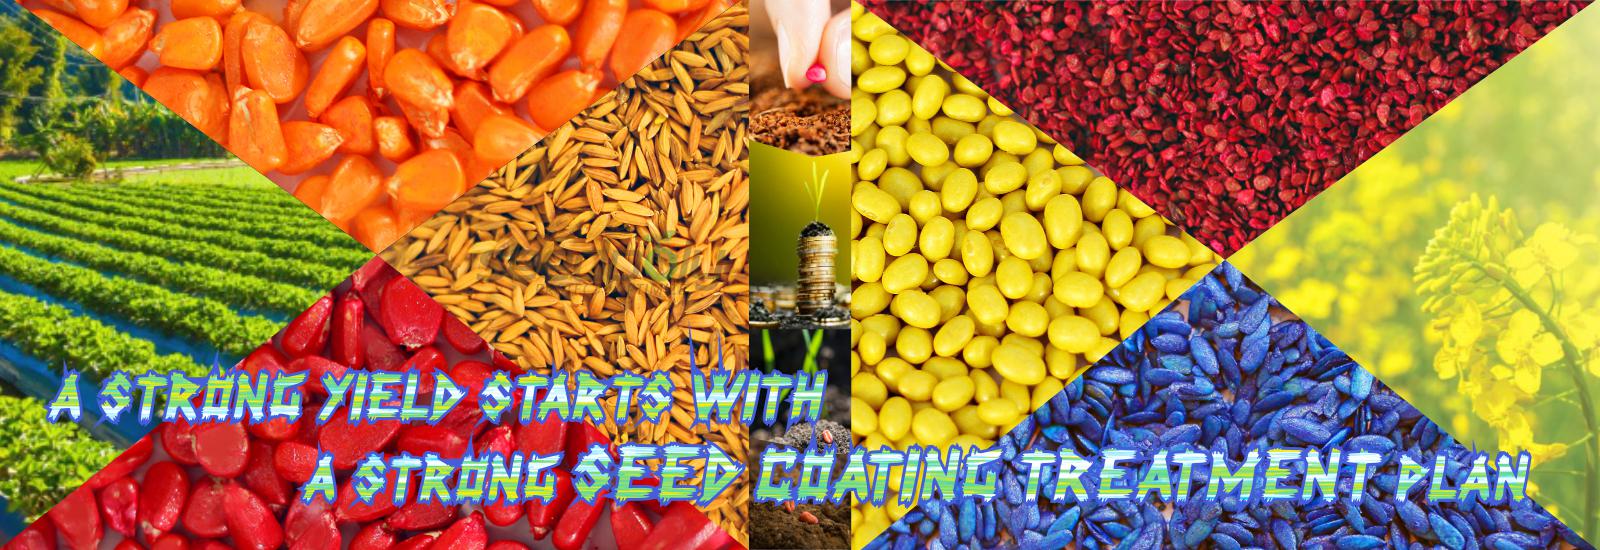 Seedpoly Seed Coating Polymer for Vegetable and Field Crops